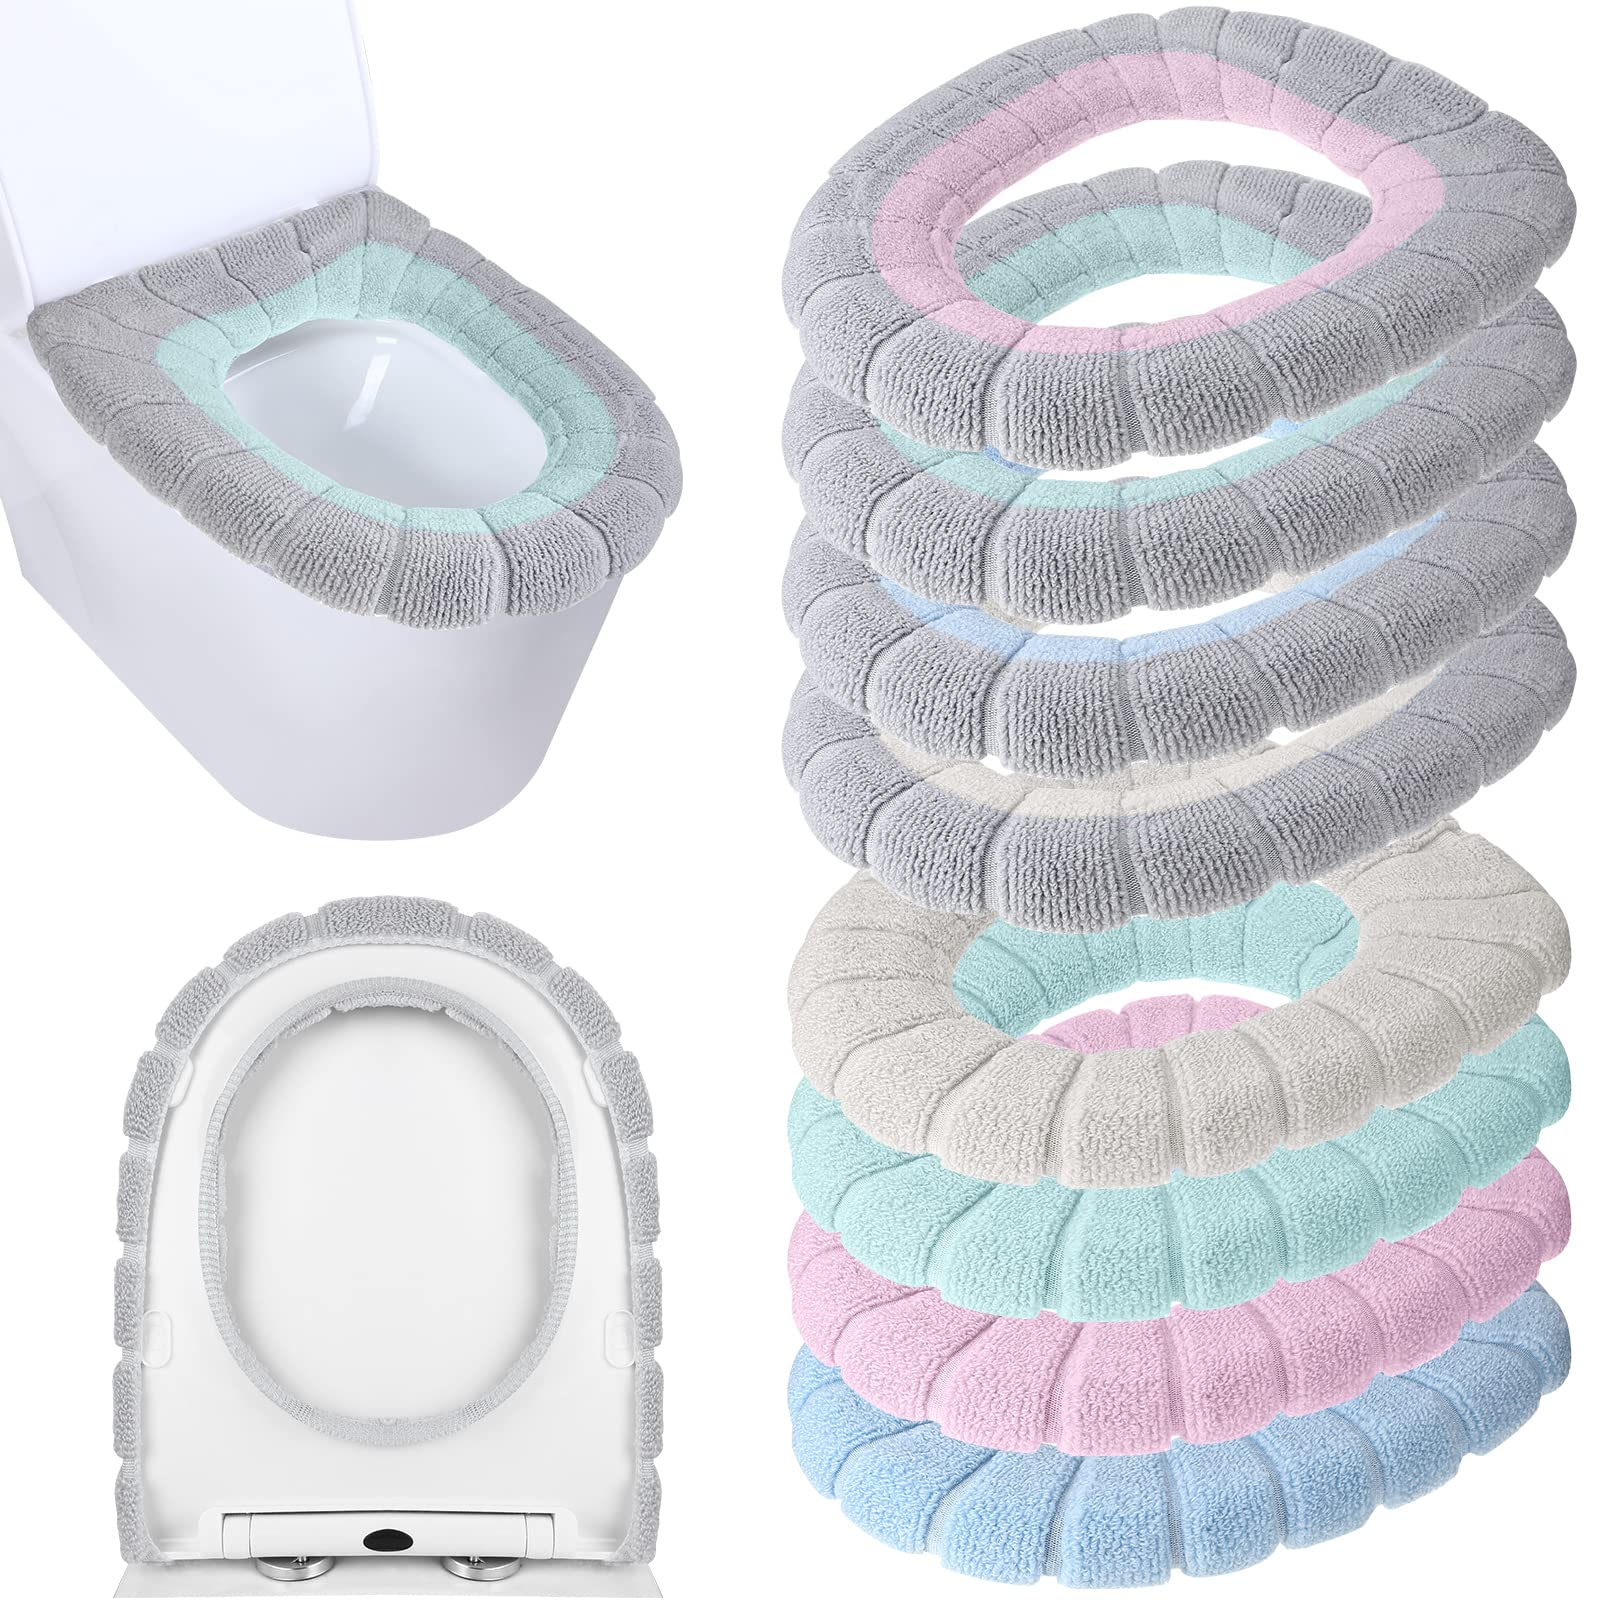 Toilet Seat Cushion Cover Pad Sponge Gel Memory Foam Waterproof Washable  Extra Large 3.94 Width Individual Package High Quality Ws3